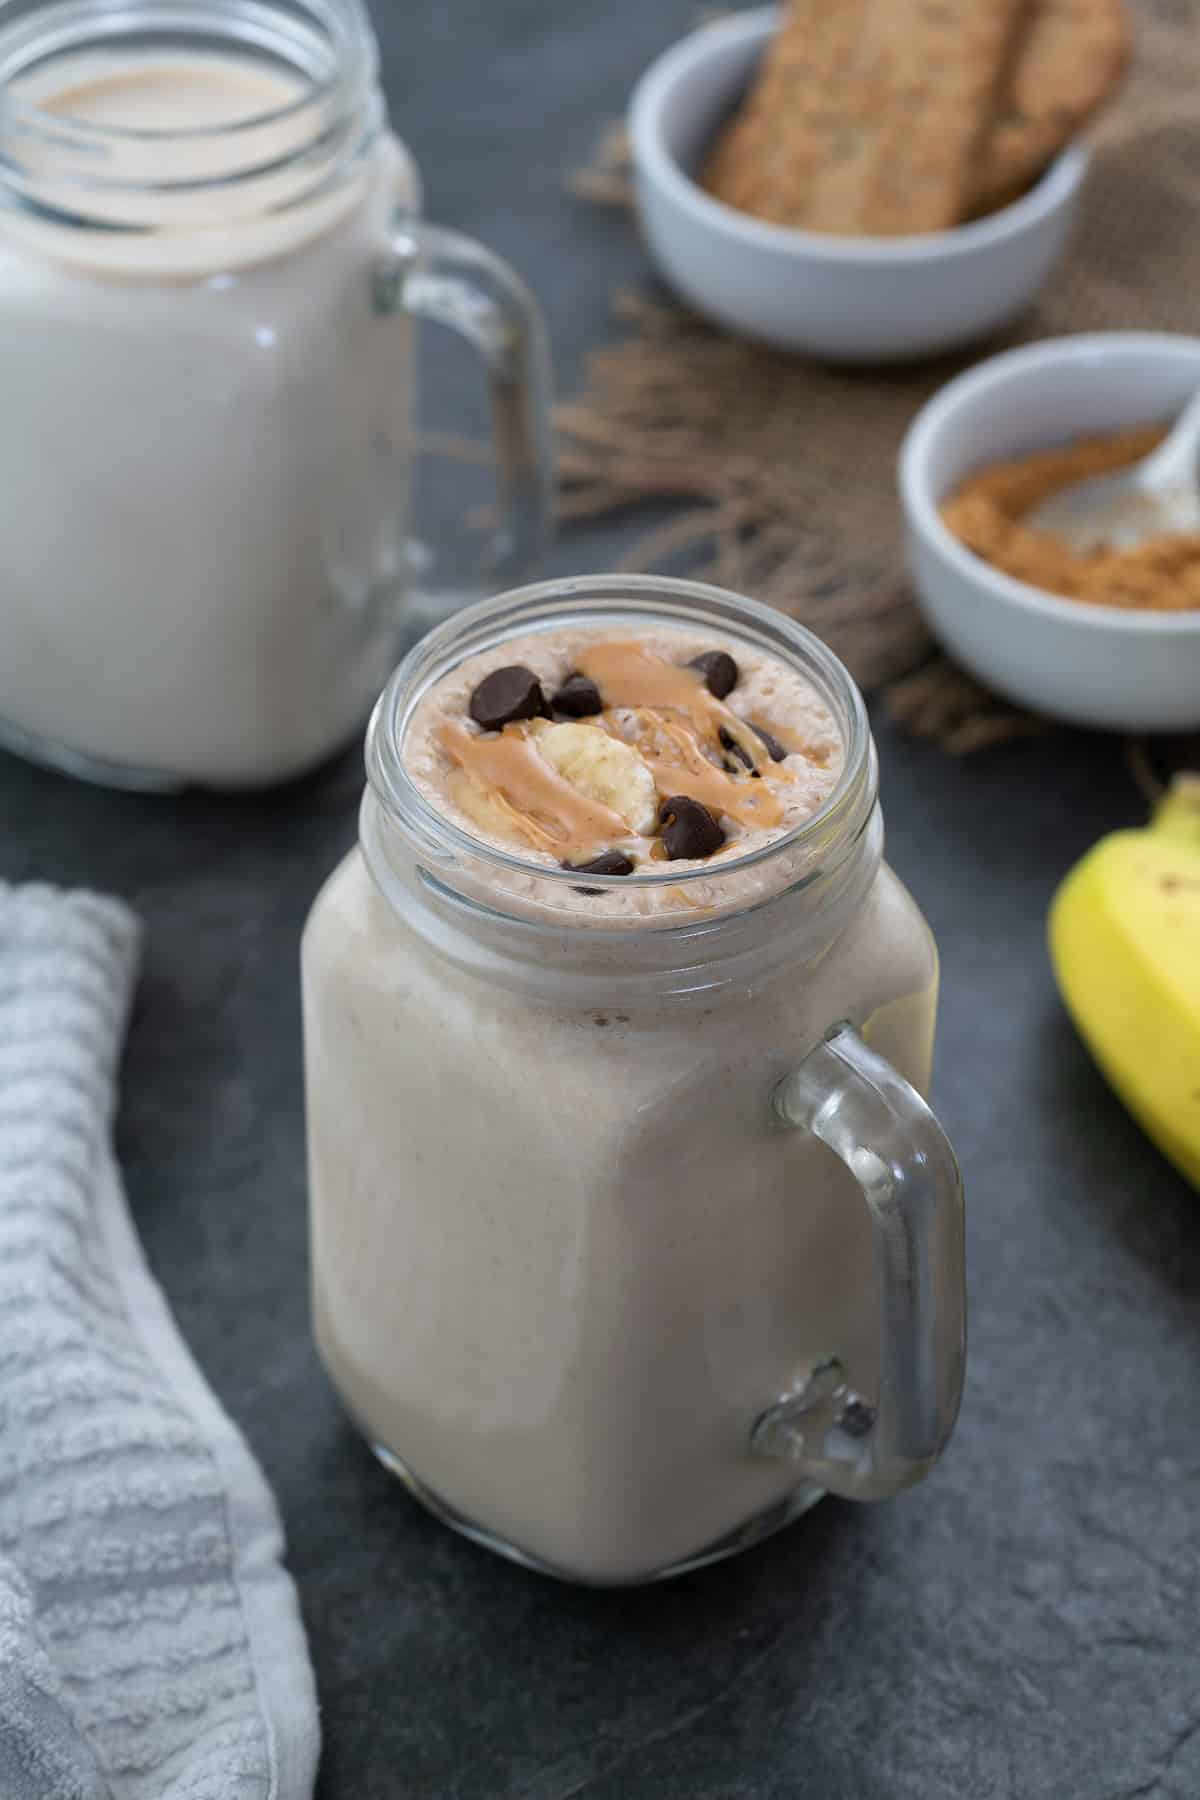 Peanut Butter Banana Smoothie served in a mug topped with chocolate chip, banana, and peanut butter.